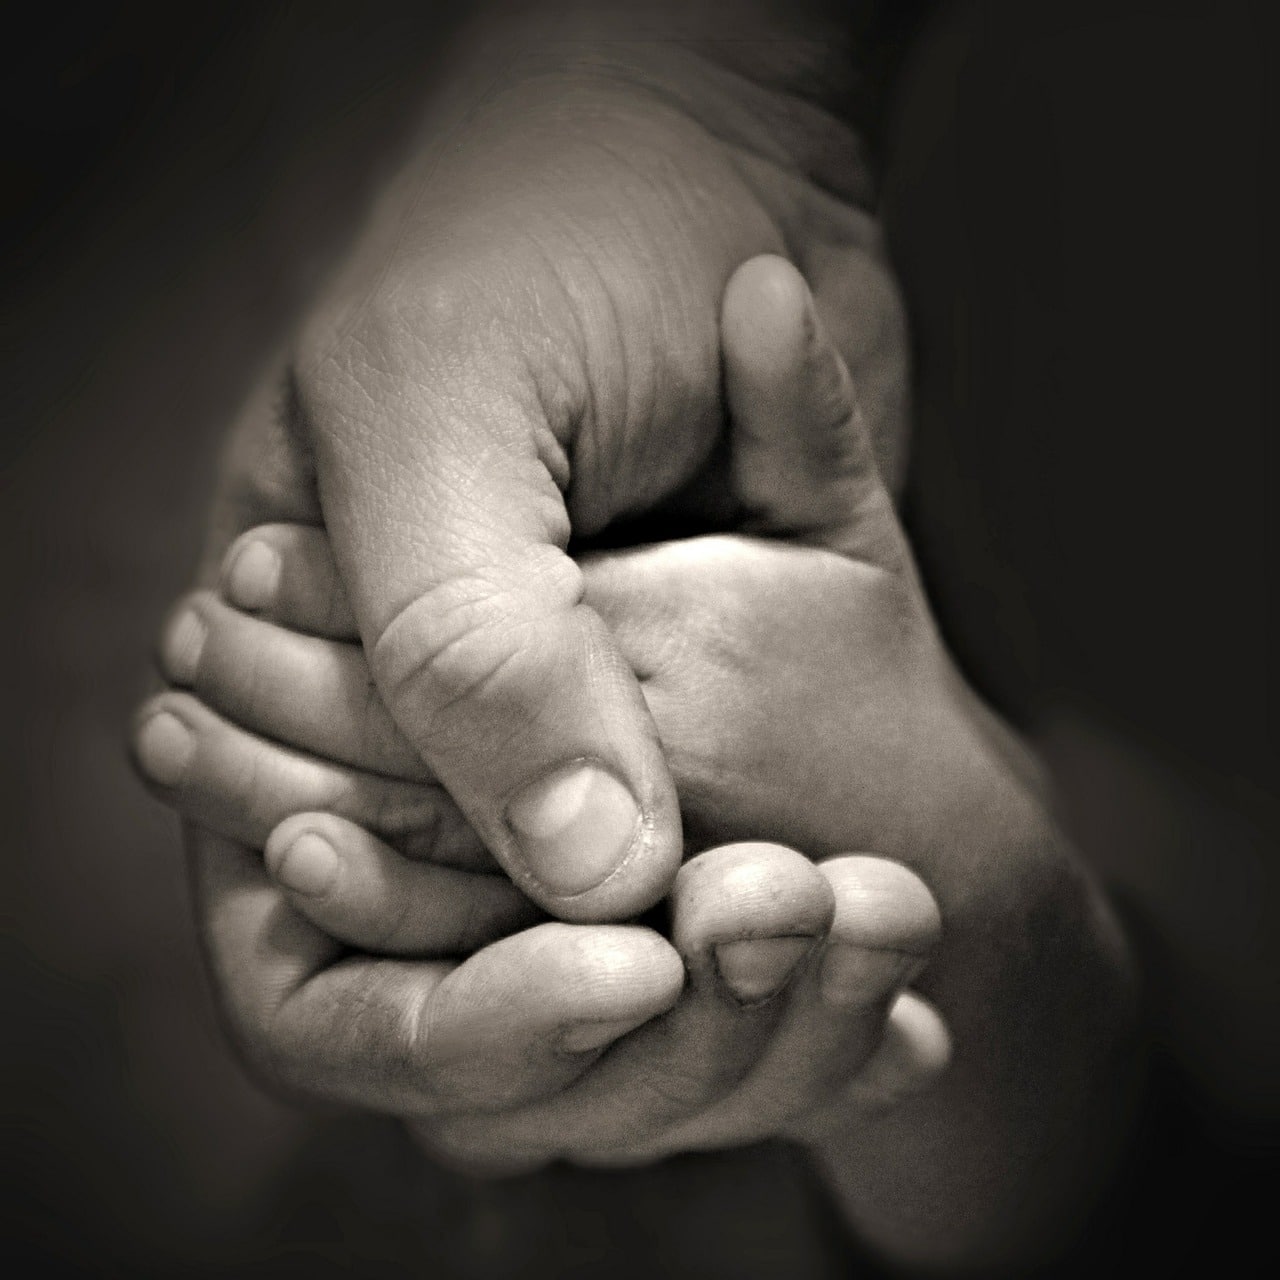 A photo of an adult hand holding onto a baby's hand. Colors washed out, vignette.